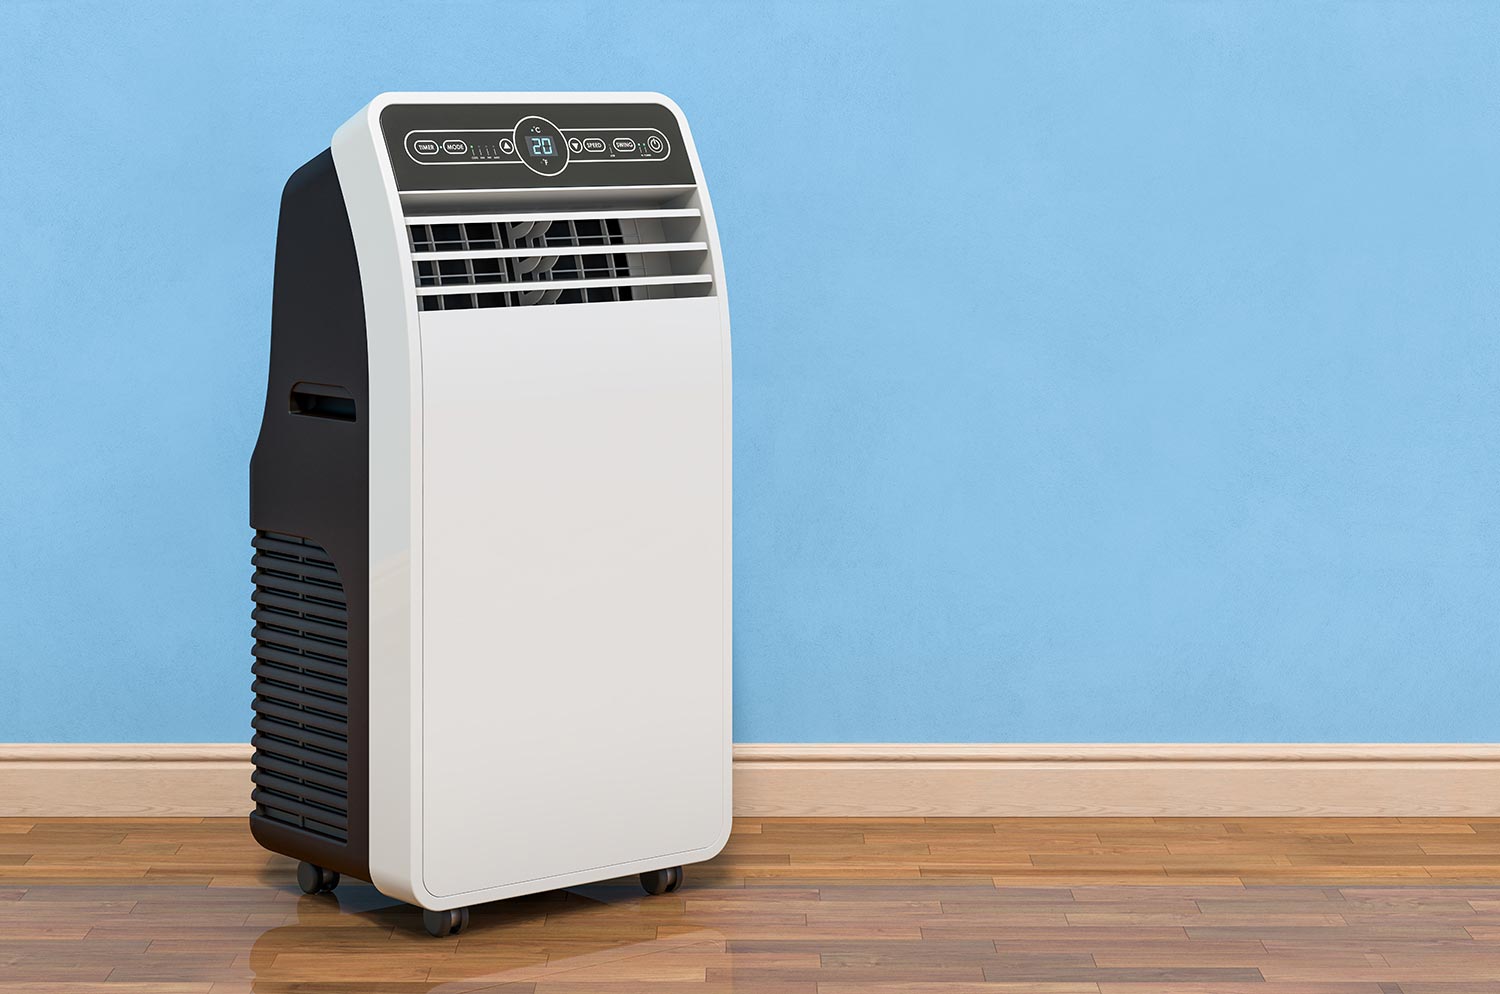 What Happens If You Do Not Drain Your Portable Air Conditioner